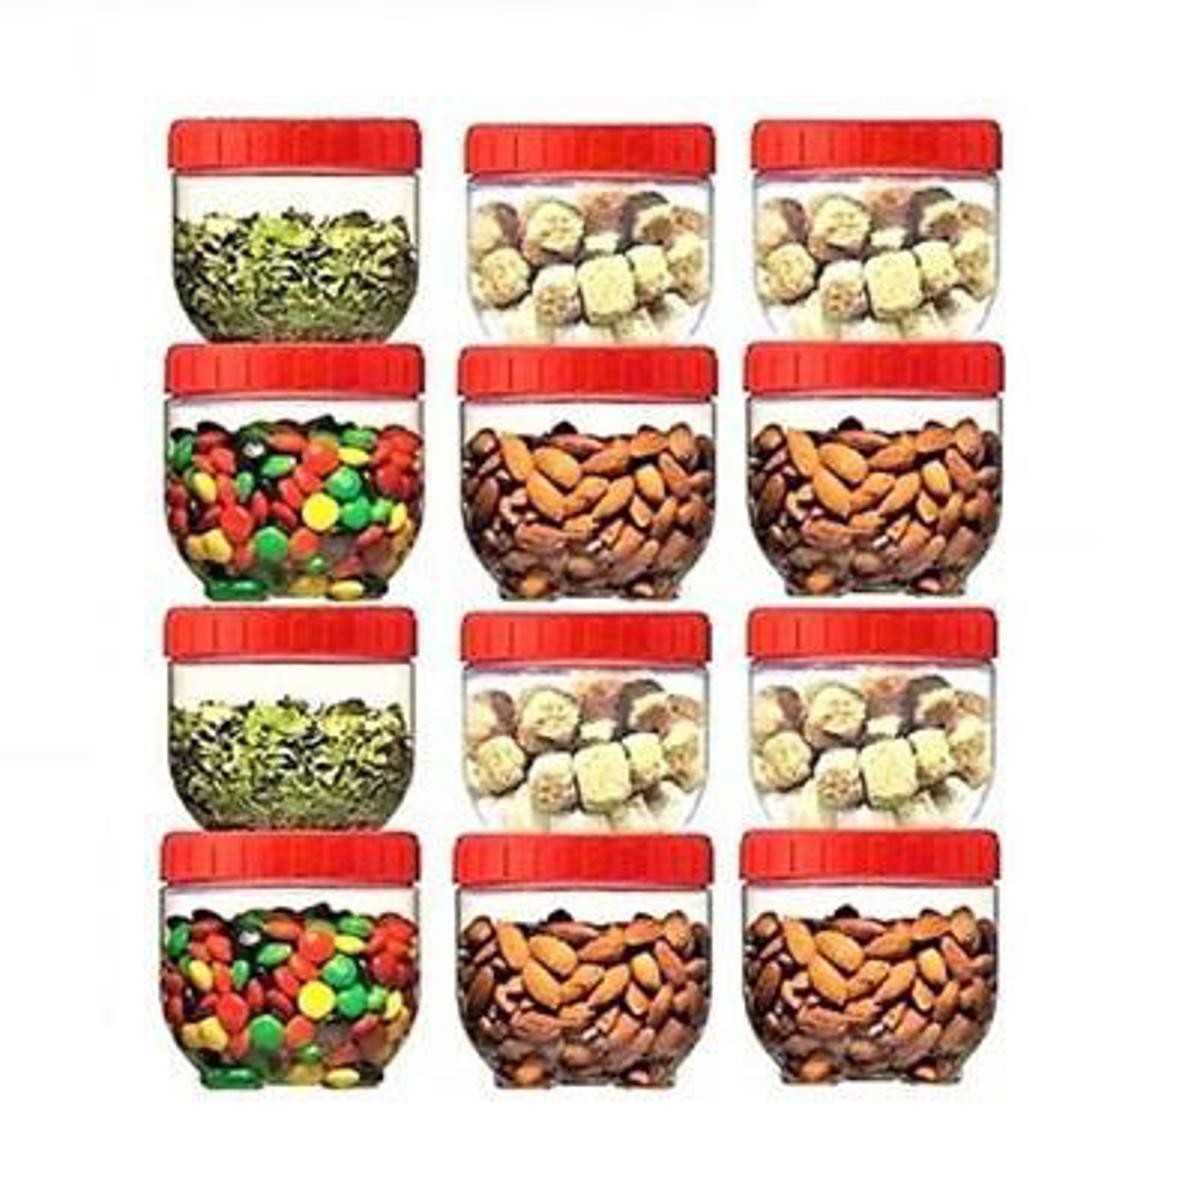 Food Spice Storage Jars 300ml With Interlock Feature 3x3 Inches by Ifsha Mart Online Shopping in Pakistan